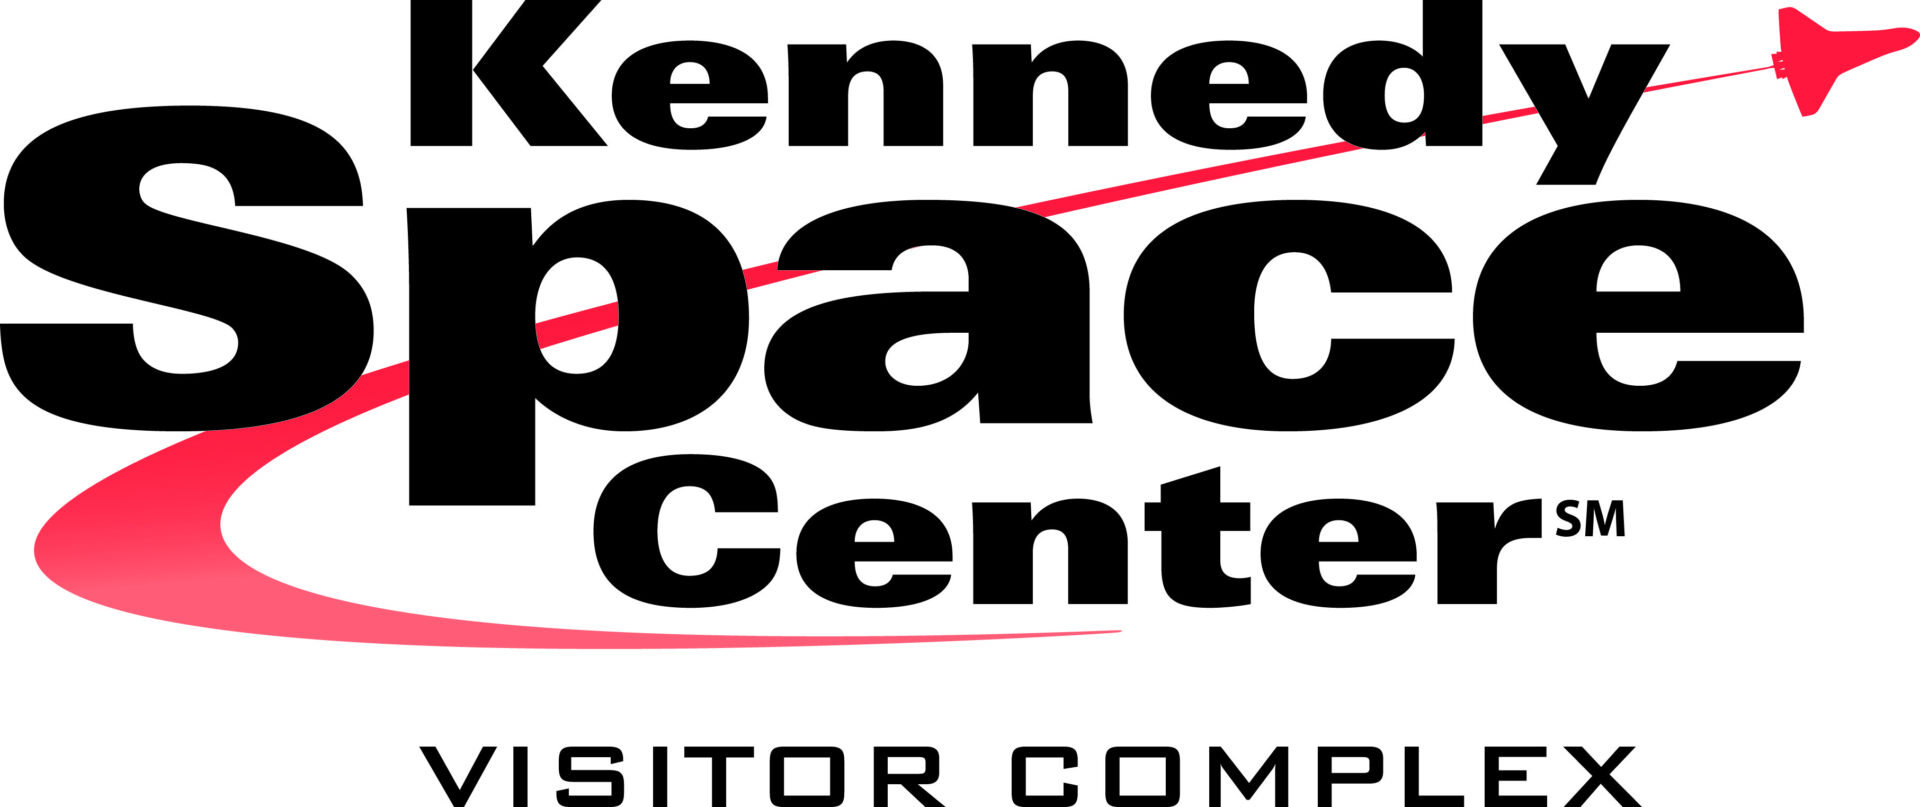 A black and red logo for the kennedy space center visitor complex.